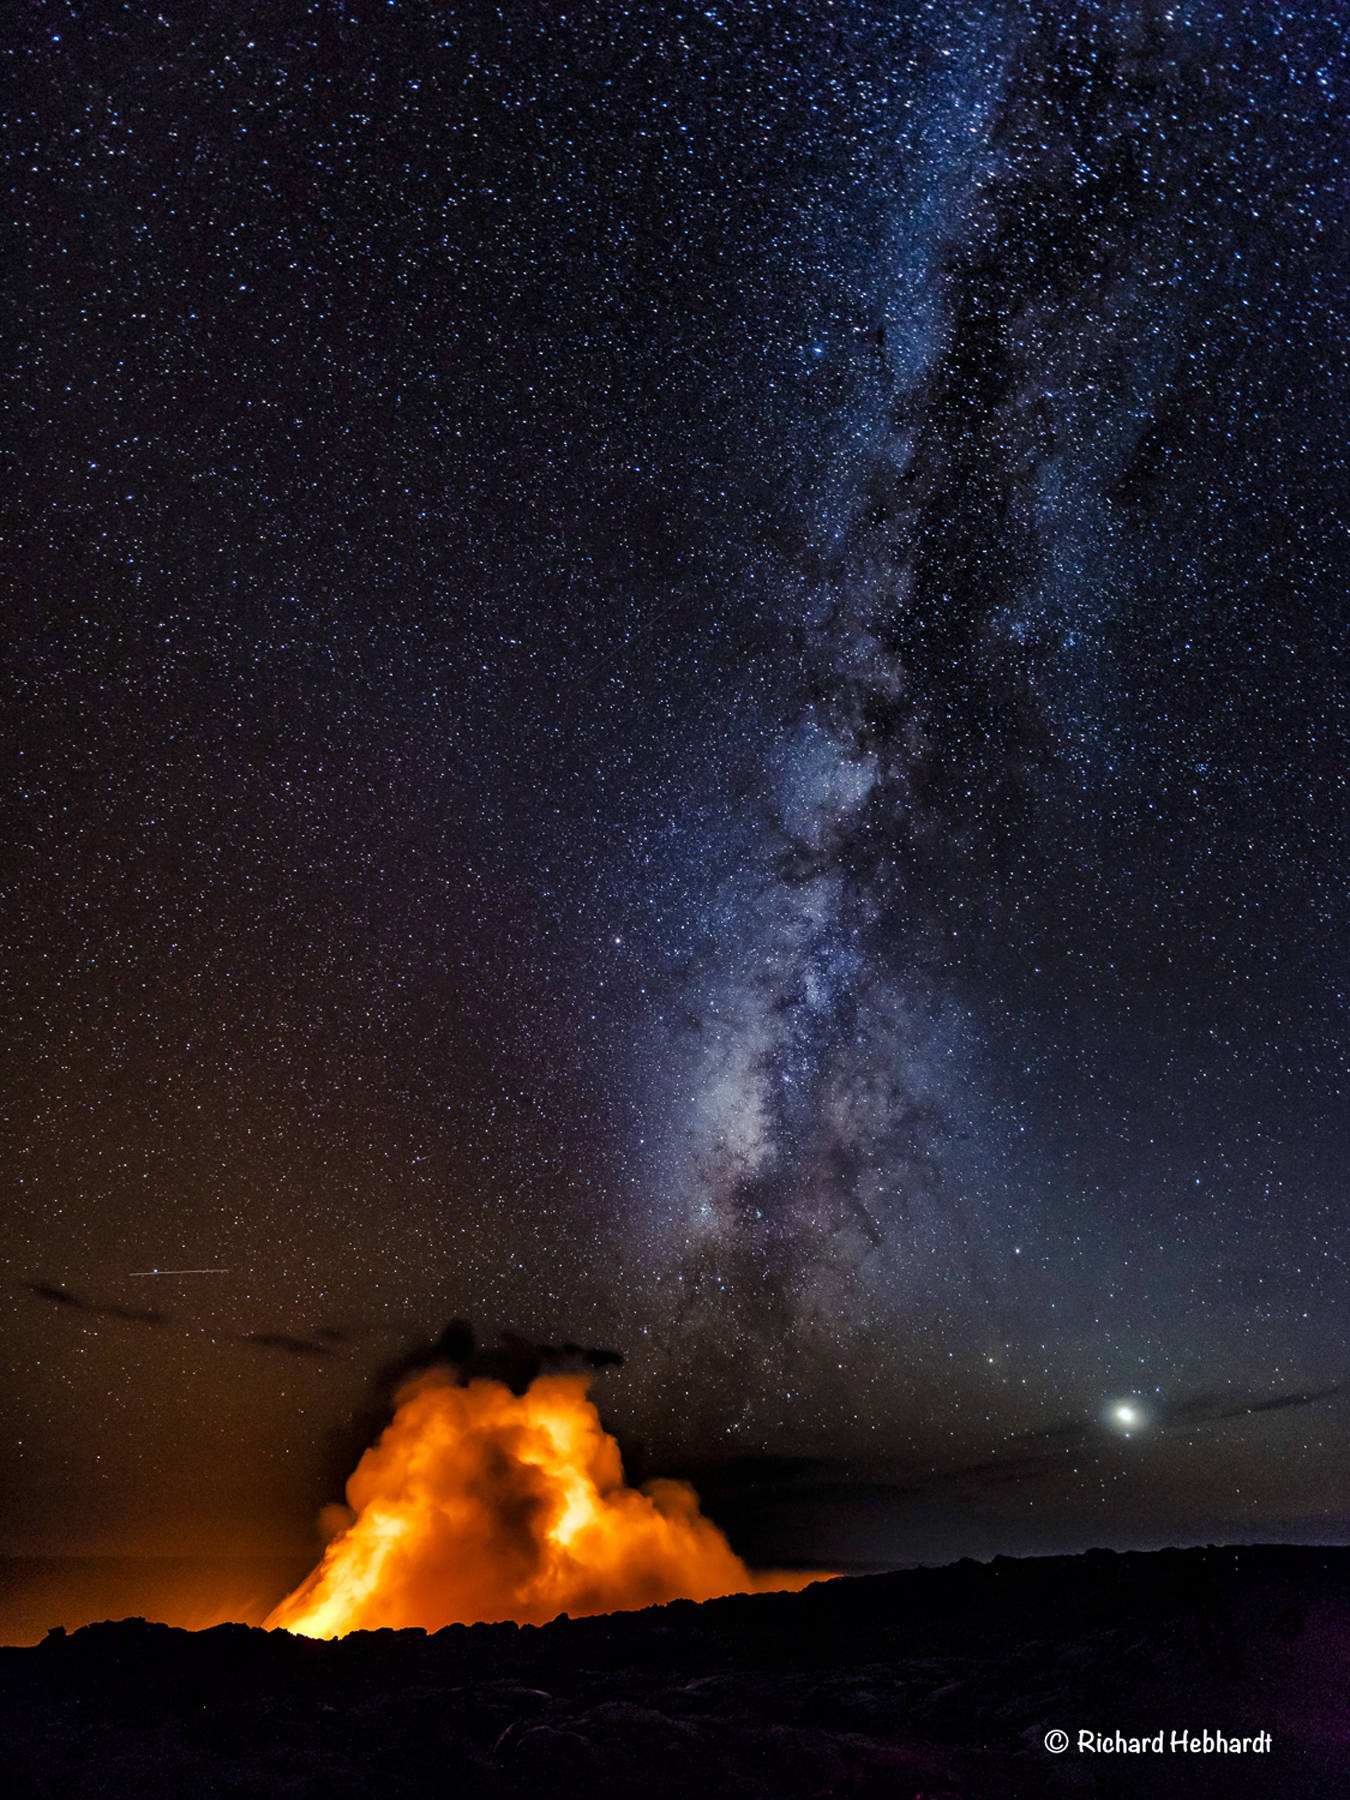 A lava plume and the Milky Way as seen in Volcanoes National Park, Hawaii. (Photo by Richard Hebhardt)